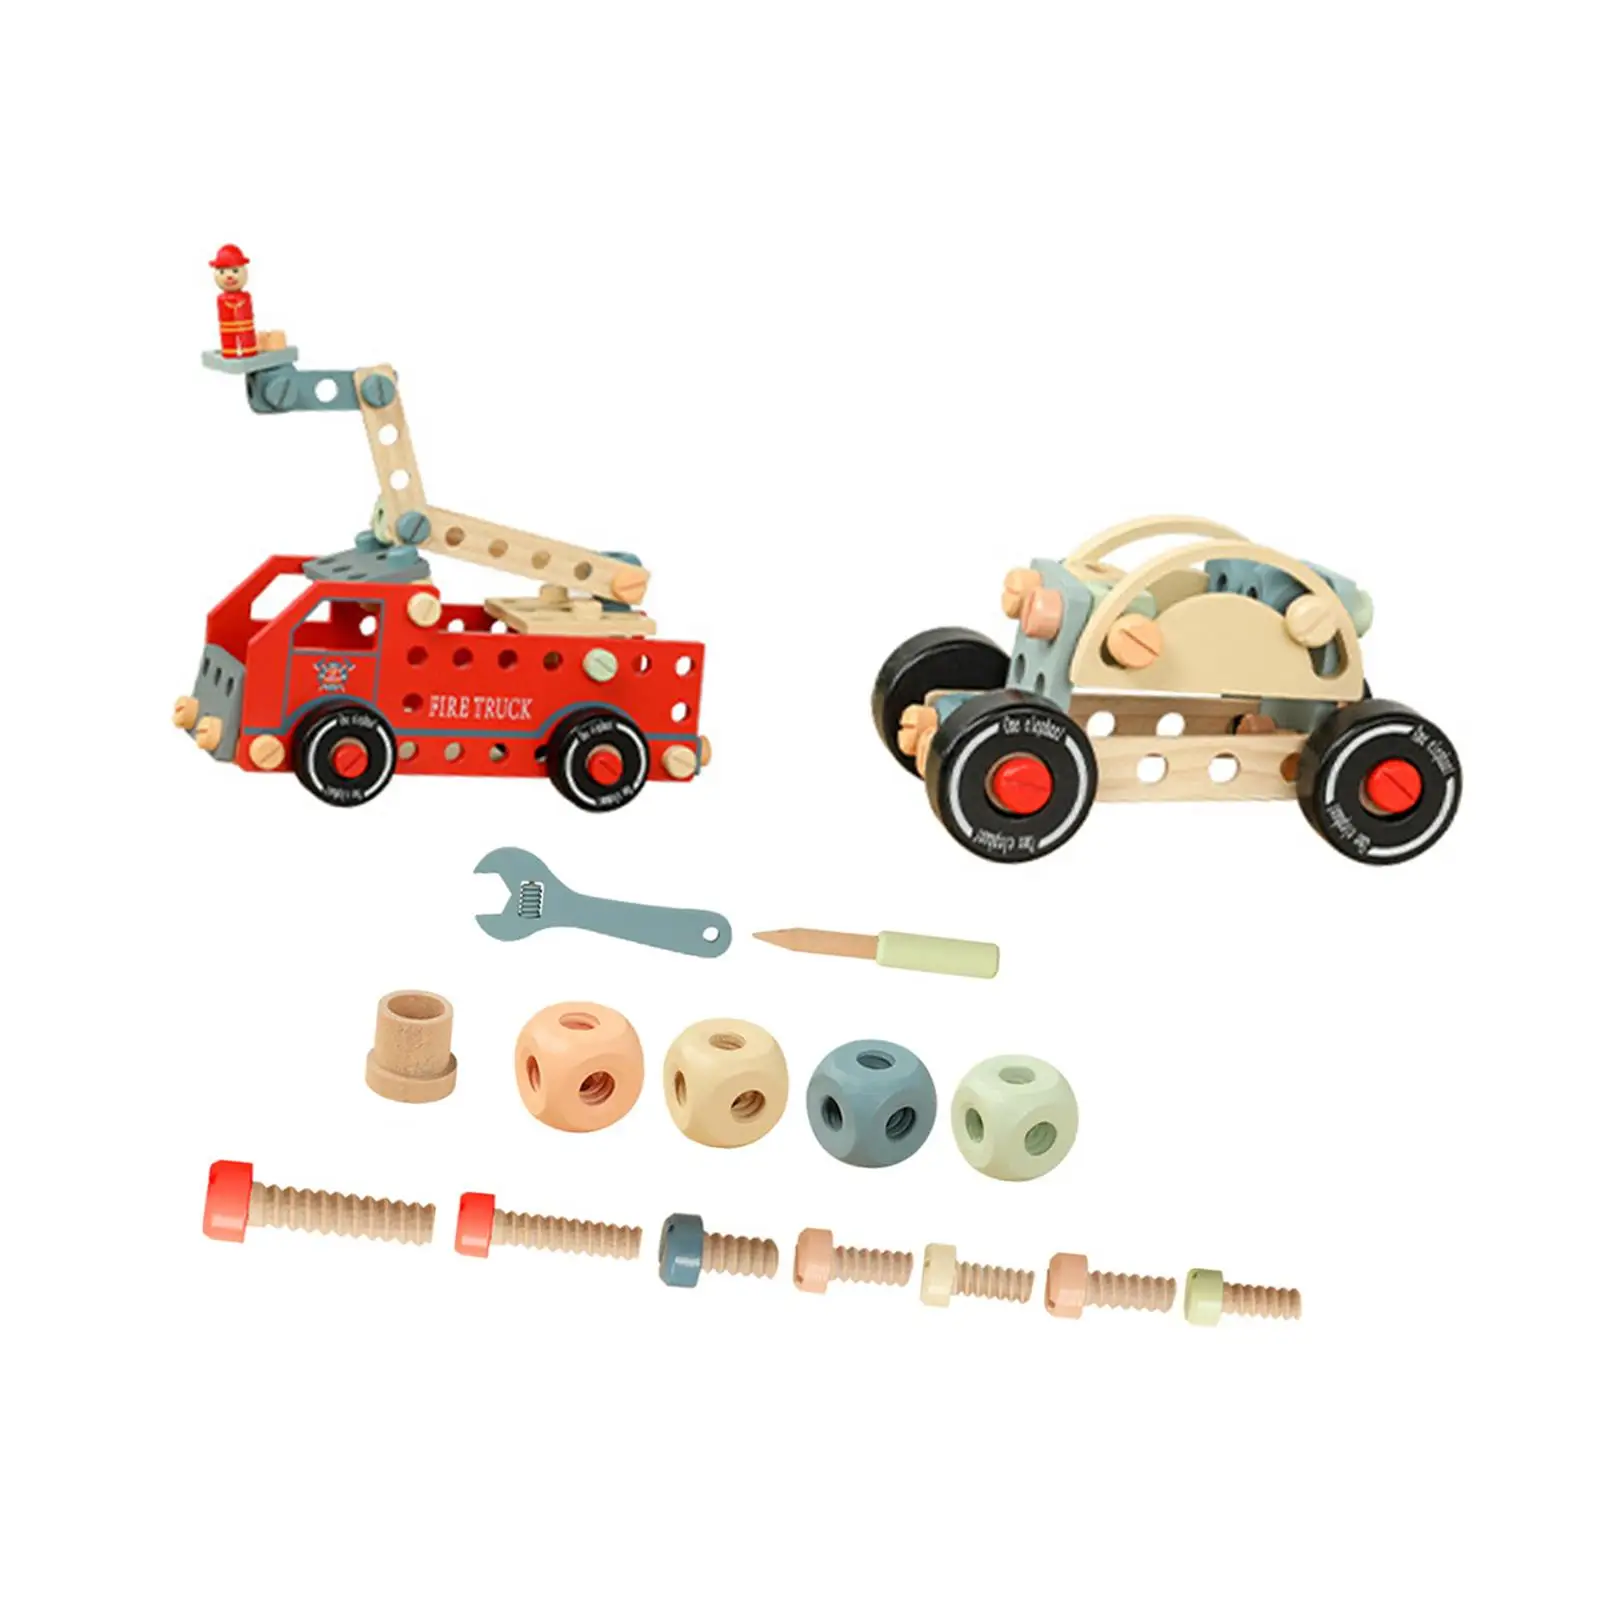 Pretend Game Toolbox Cognitive Development Kids Construction Toy Set Wooden Nut Tool for Education Learning Outdoor Preschool